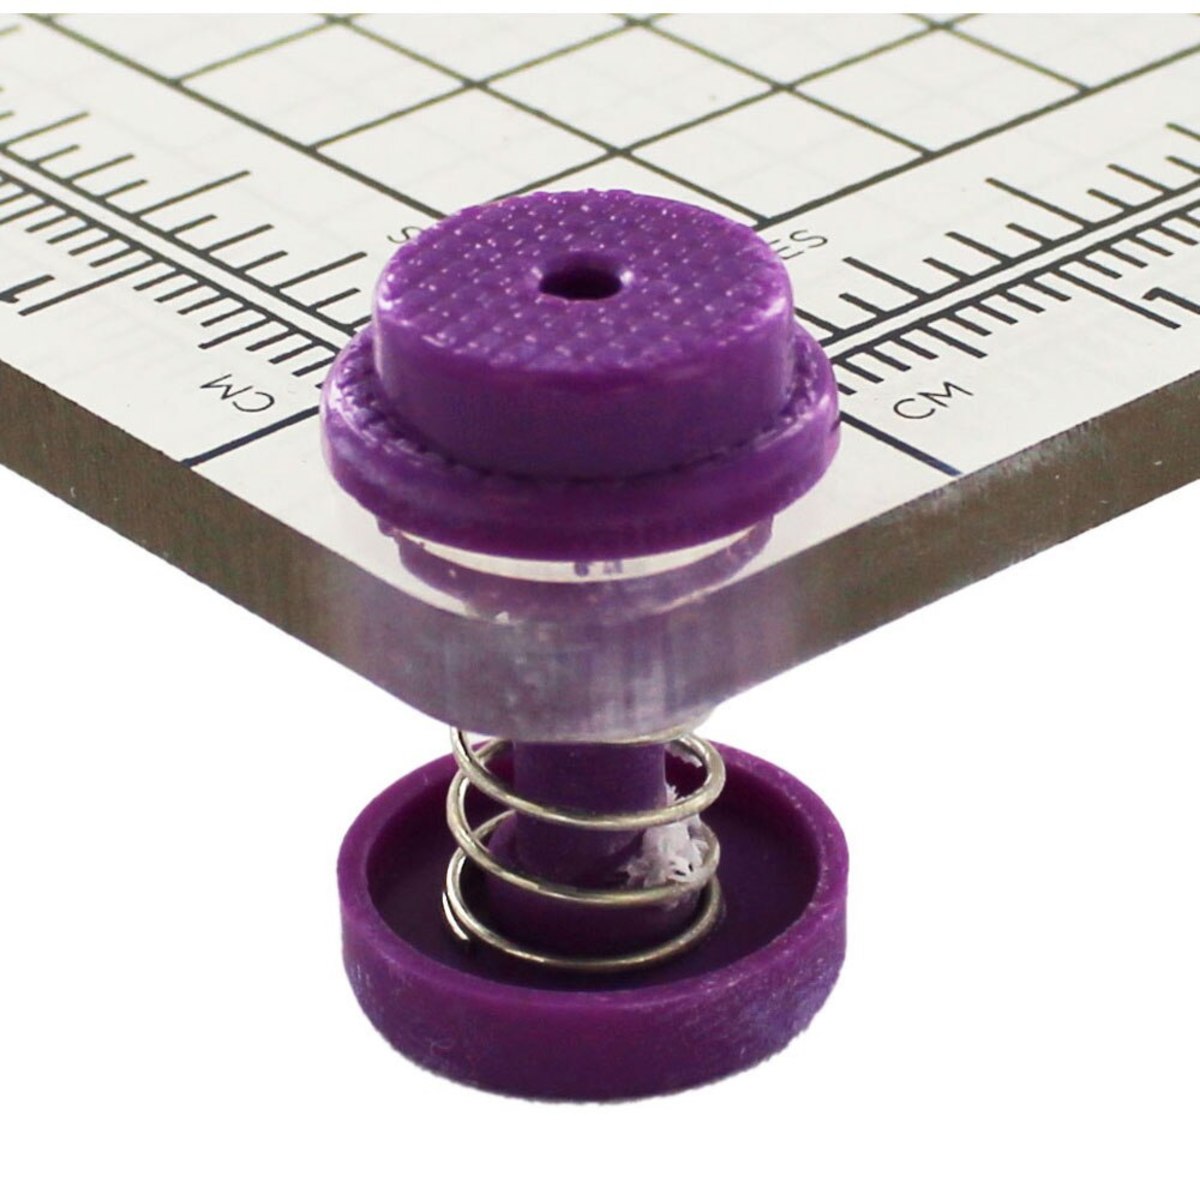 The stamping platform uses a spring to get the image stamped.